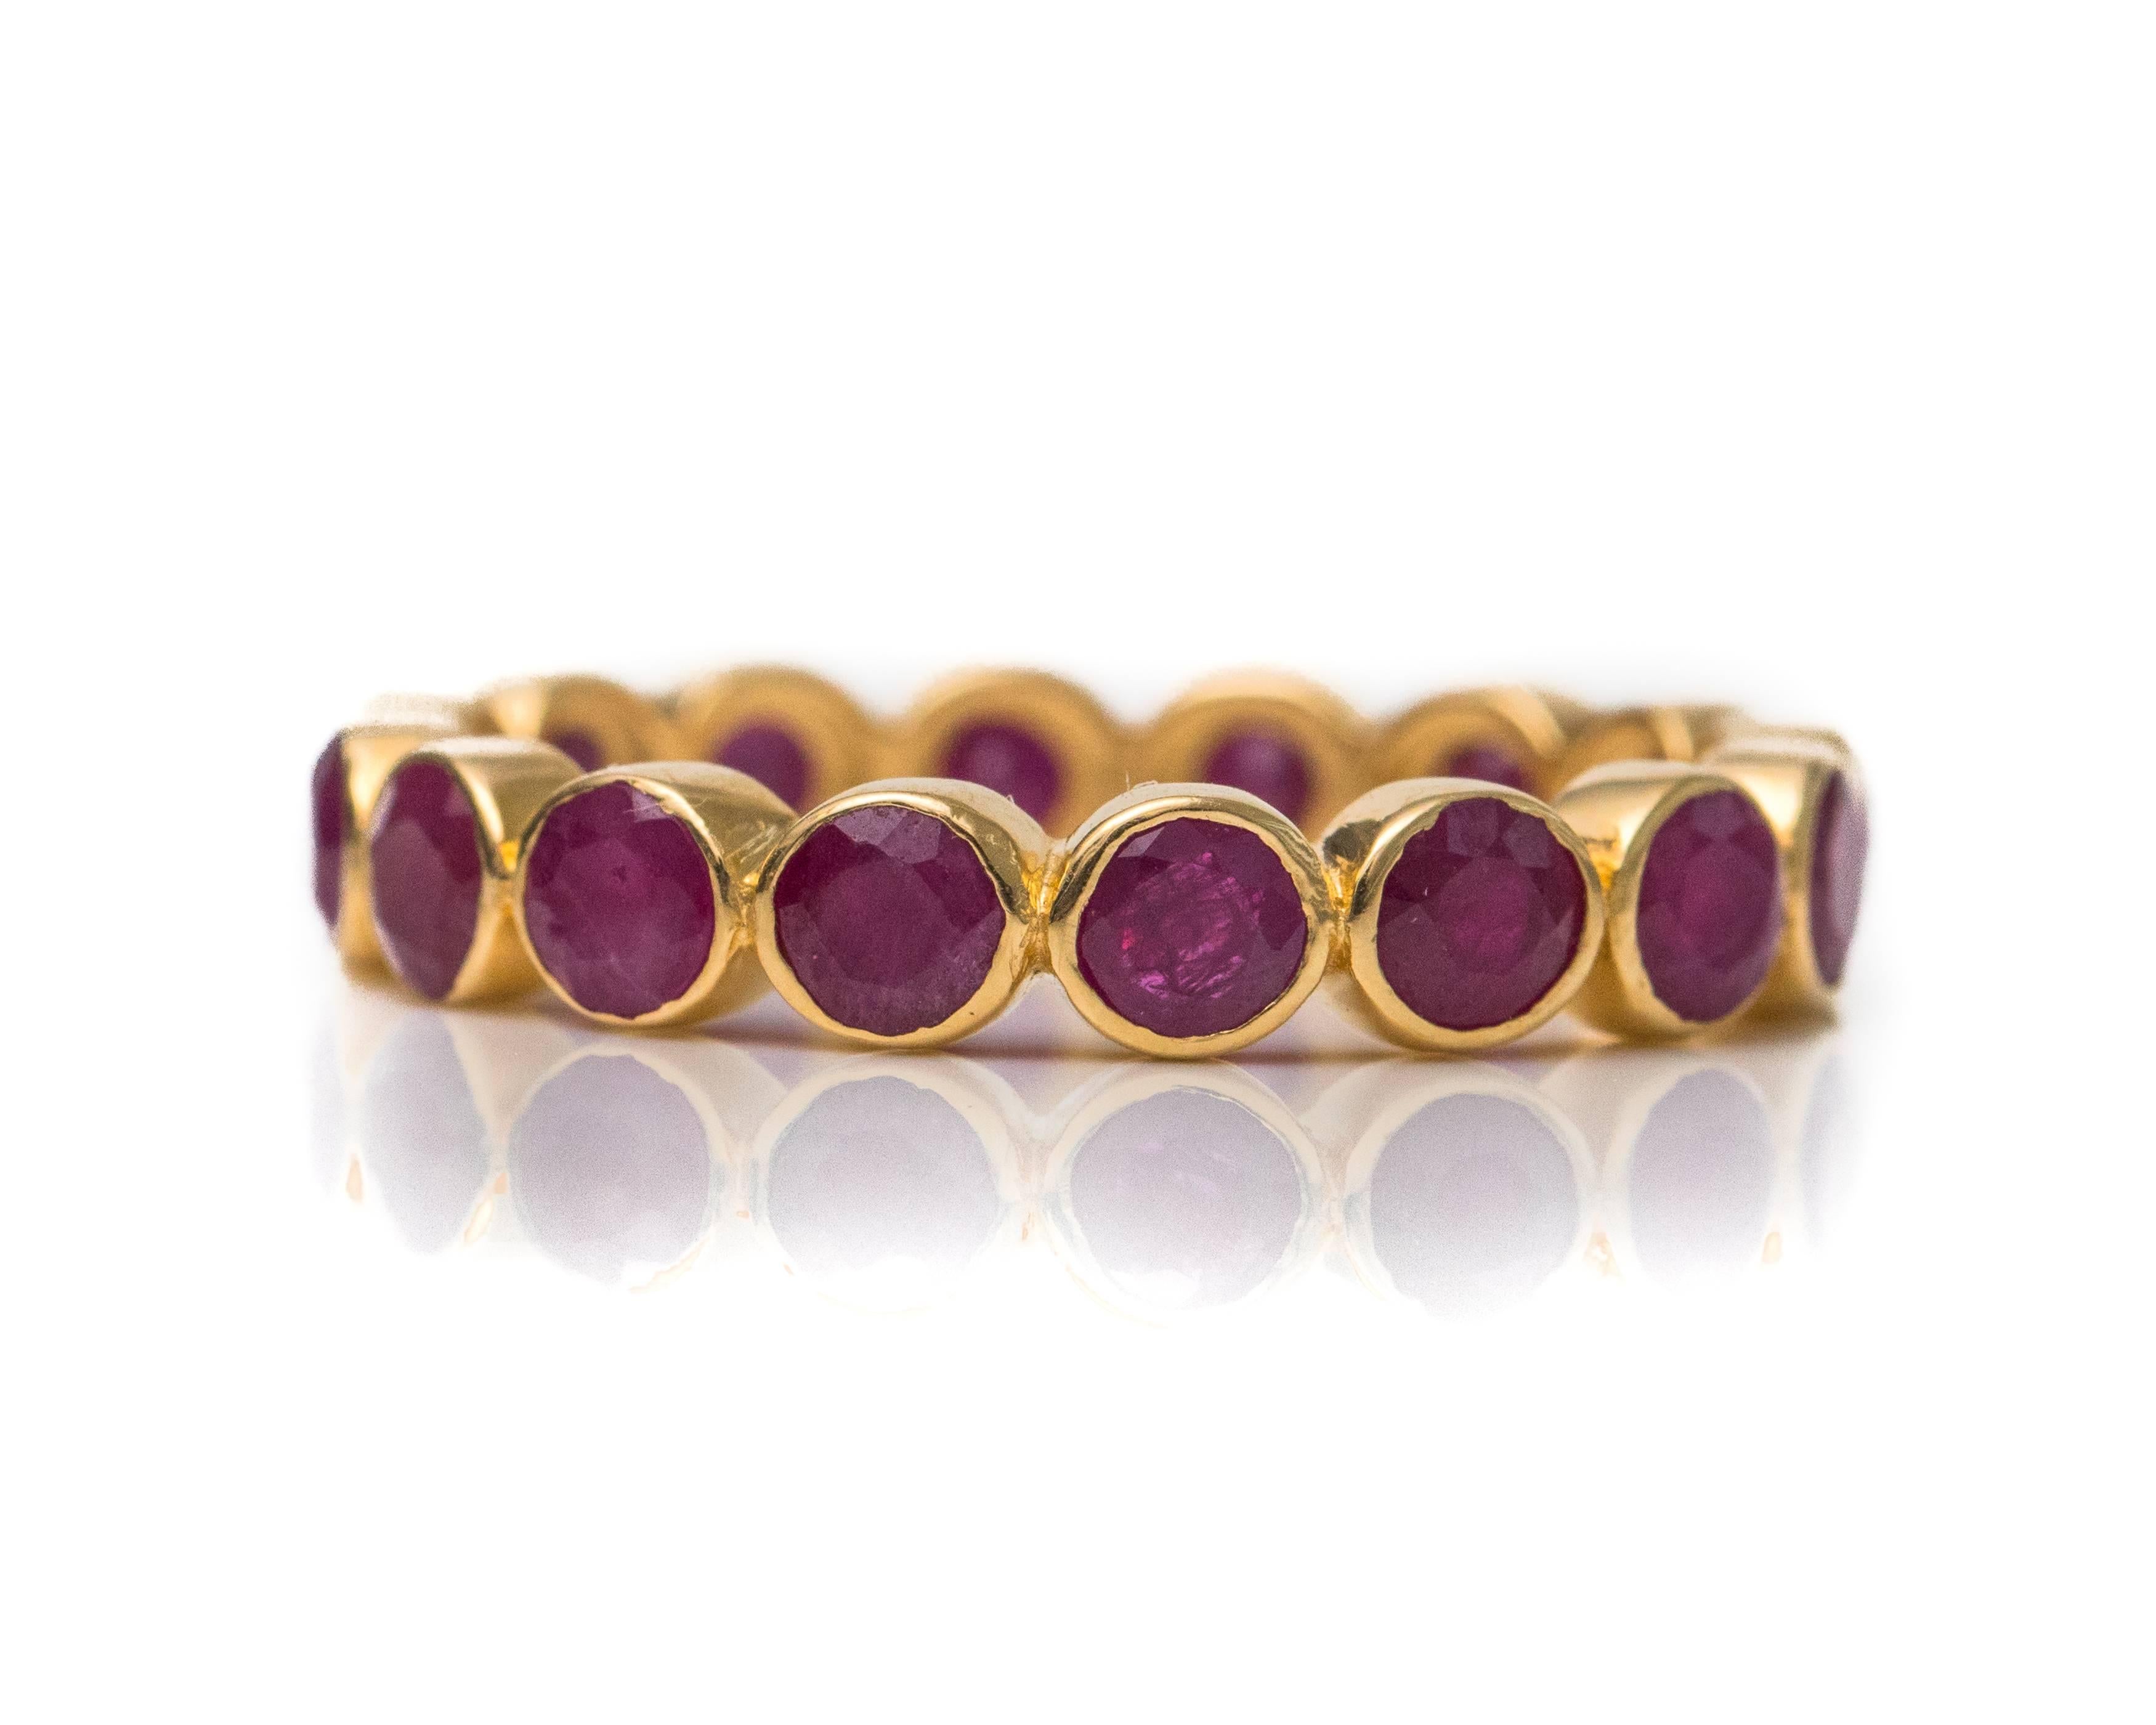 2.5 Carat Ruby and 18 Karat Yellow Gold Eternity Band

Features a ring of Red Rubies in 18 Karat Yellow Gold. The Round Brilliant Red Ruby gemstones are bezel set in rich 18 Karat Yellow Gold. The sides of the ring have a smooth, high polish finish.